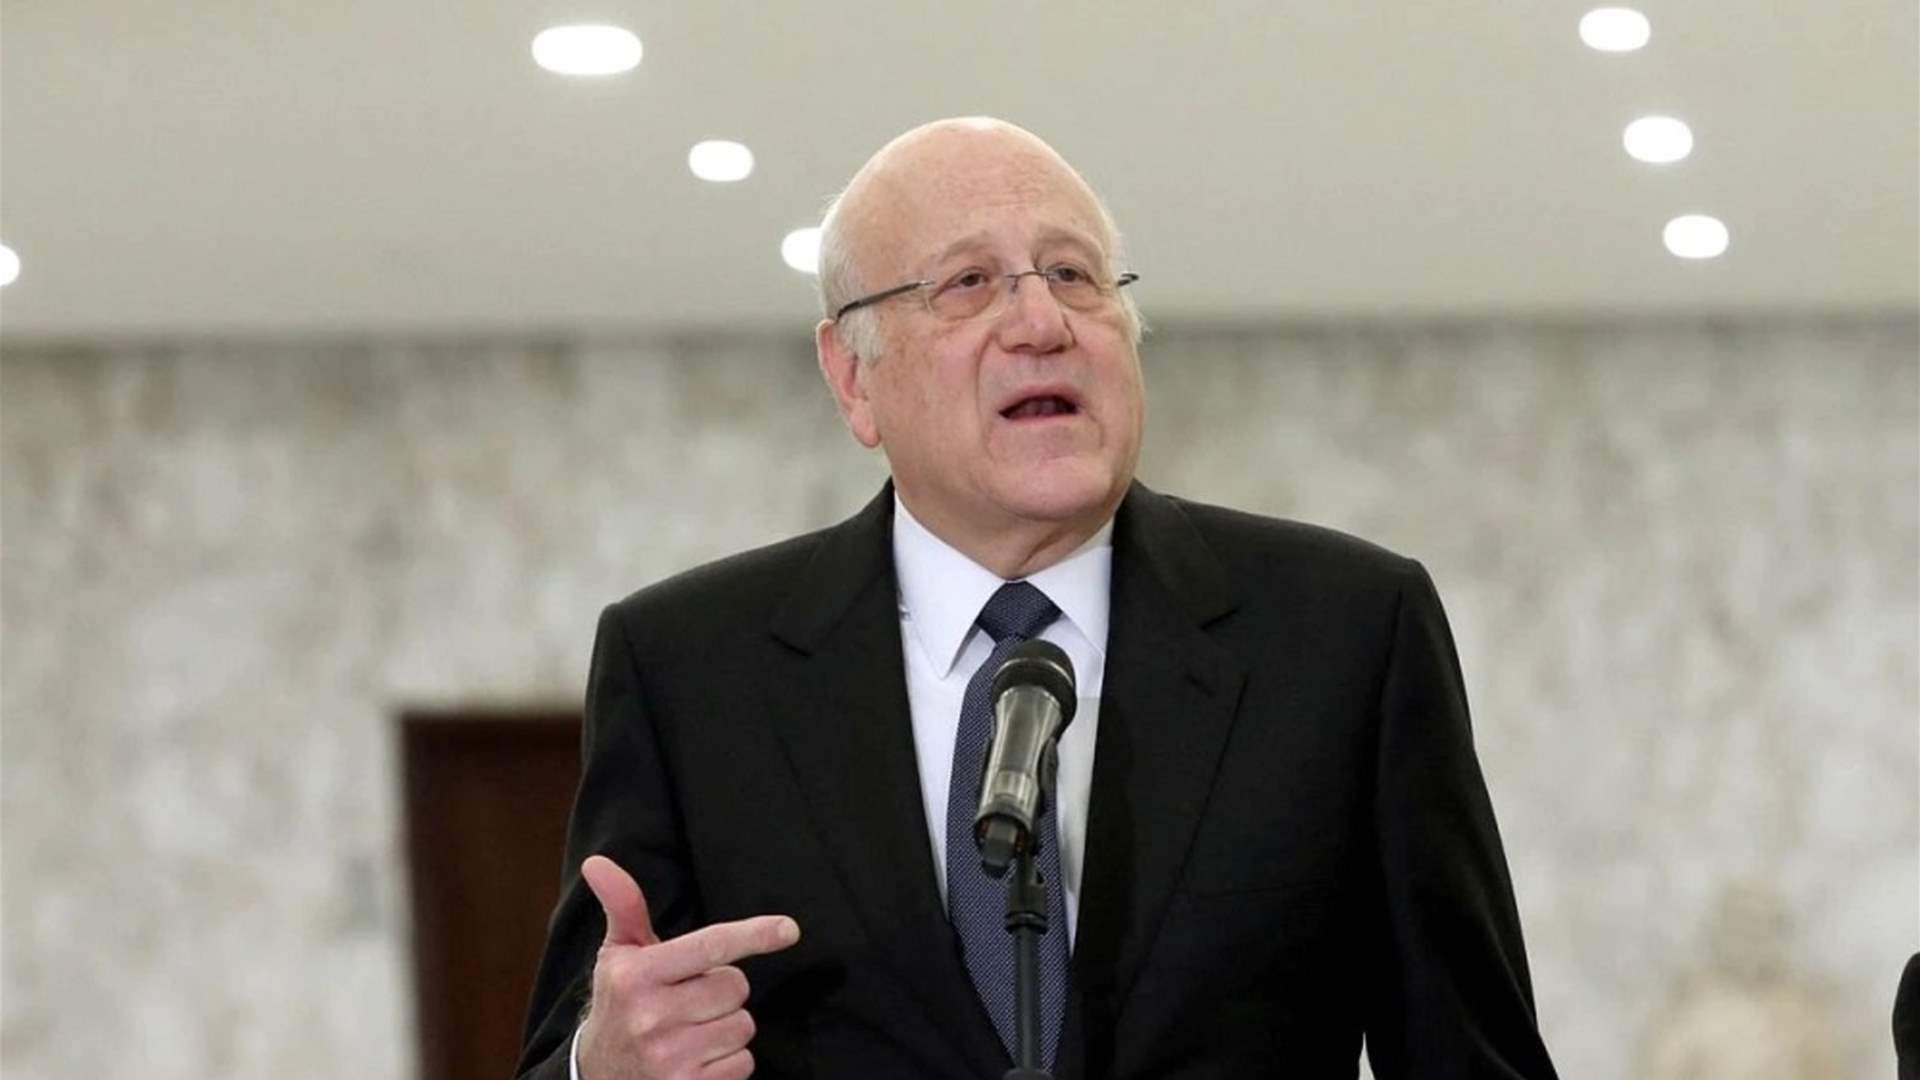 Lebanon&#39;s PM Mikati reaffirms commitment to UN Resolution 1701 in Meetings with Security Council ambassadors